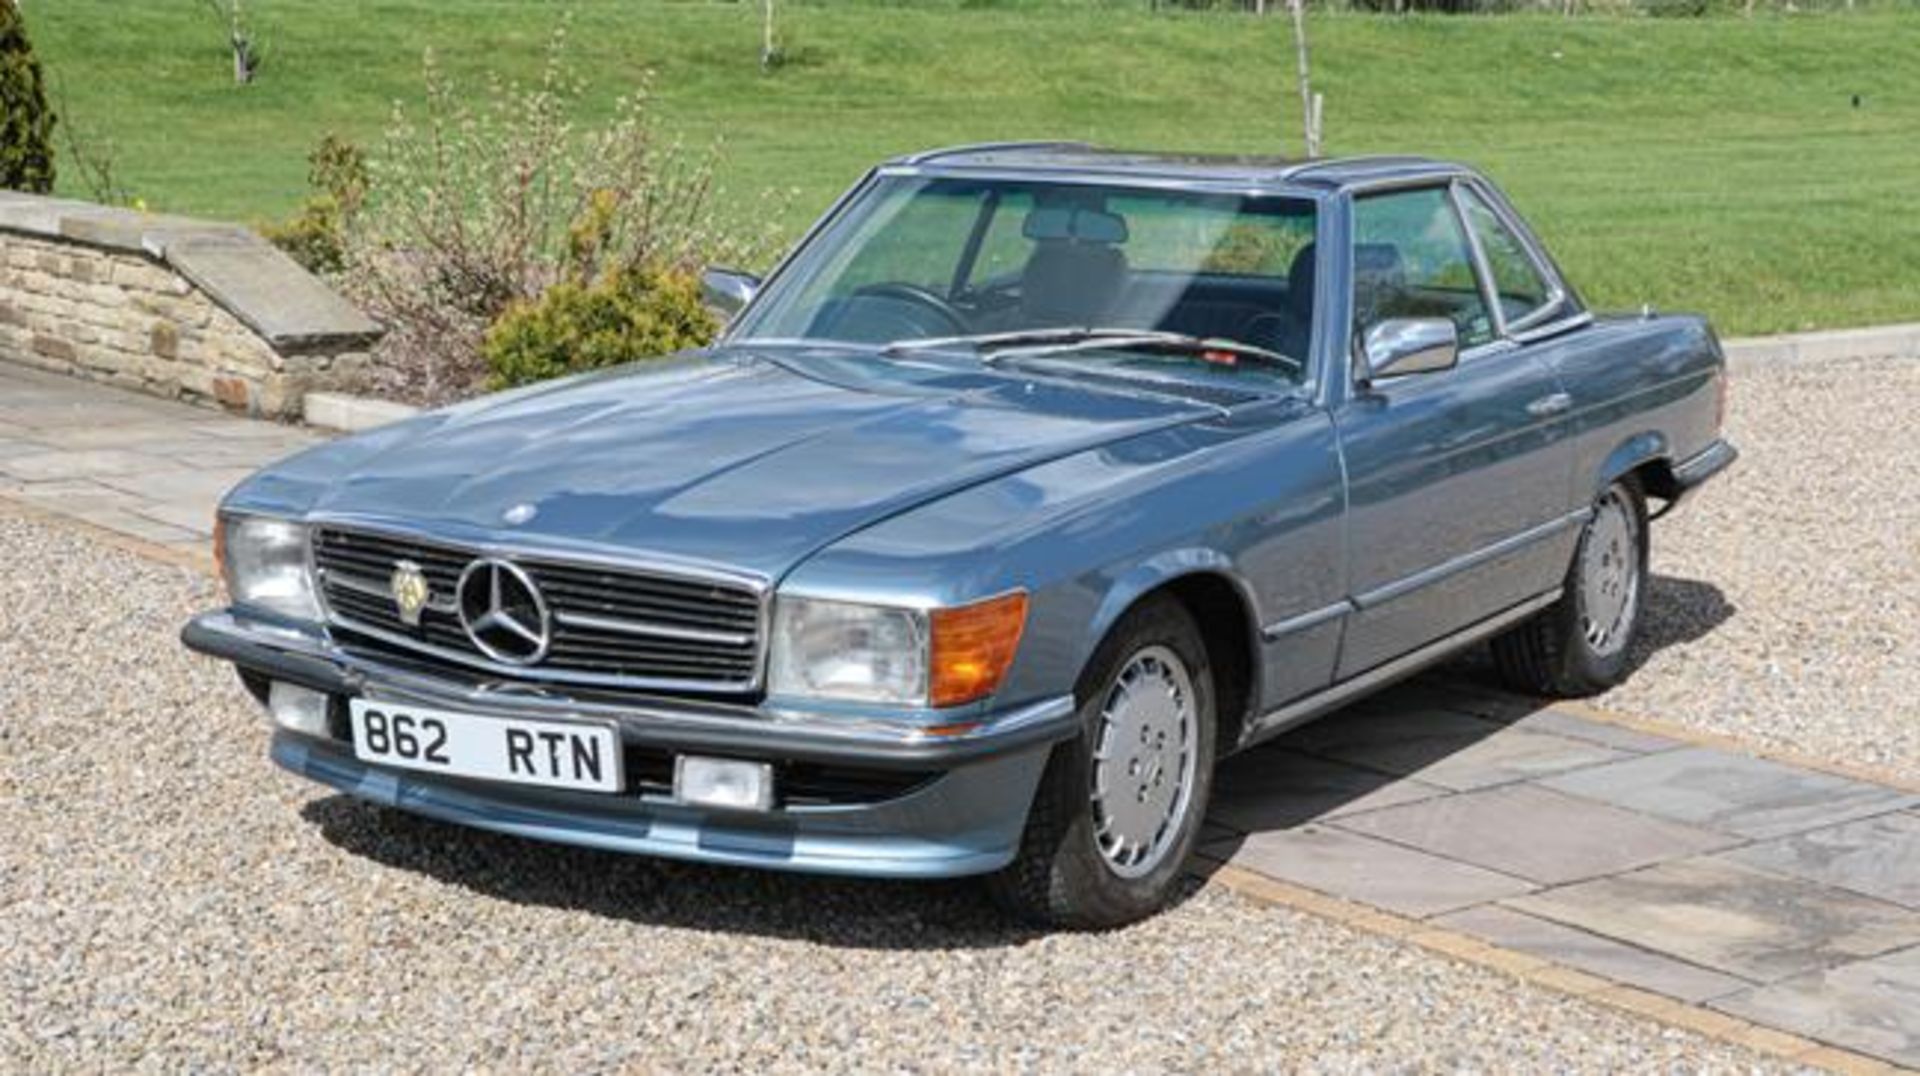 1985 Mercedes 380-SL Auto Convertible Registration number: 862 RTN Date of first registration: 03 01